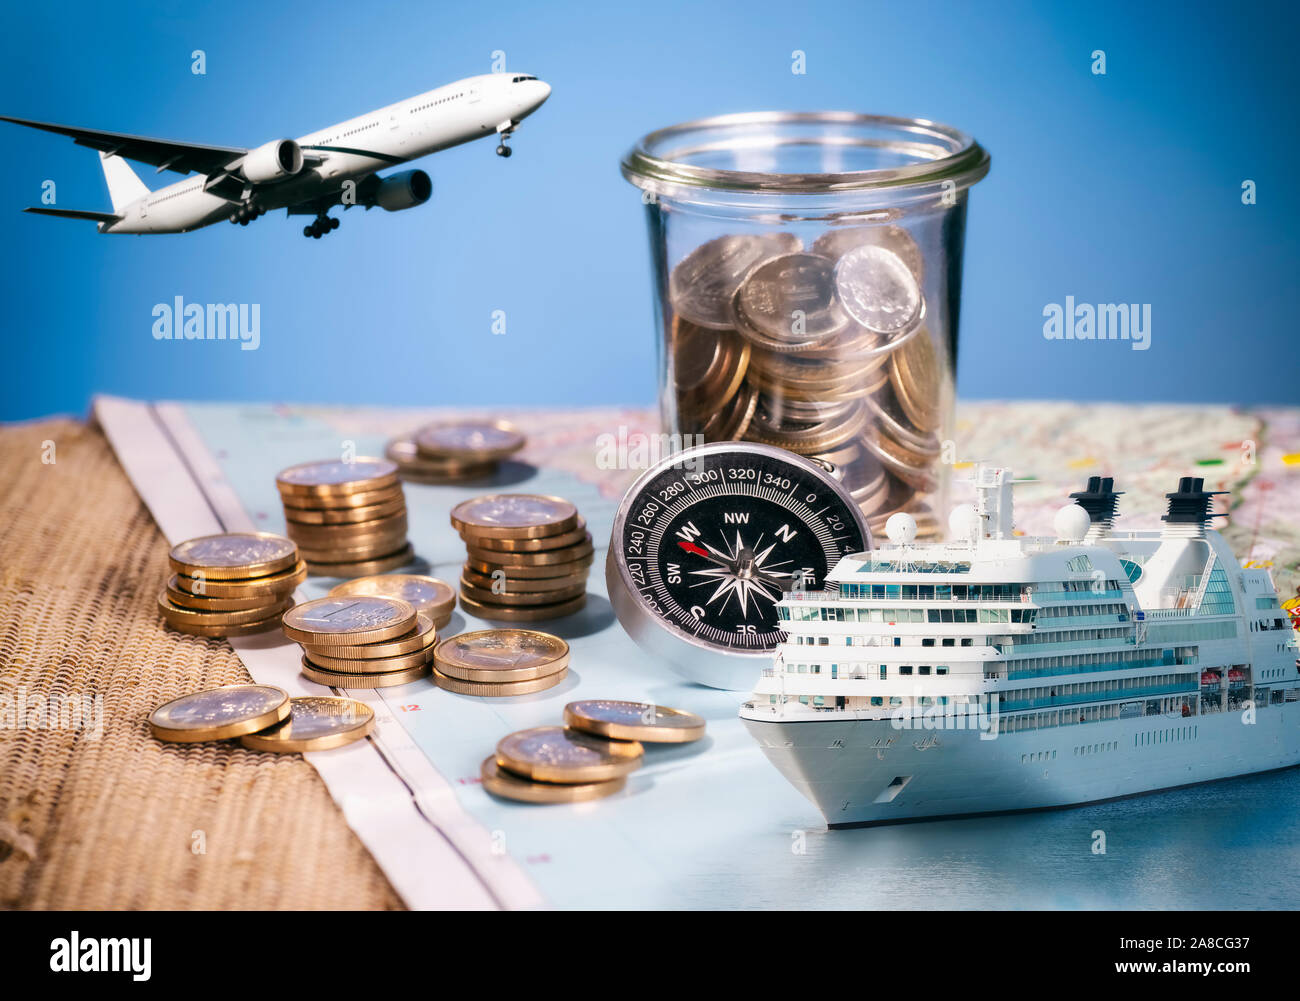 Airplane and cruise ship with compass and coins on a map Stock Photo